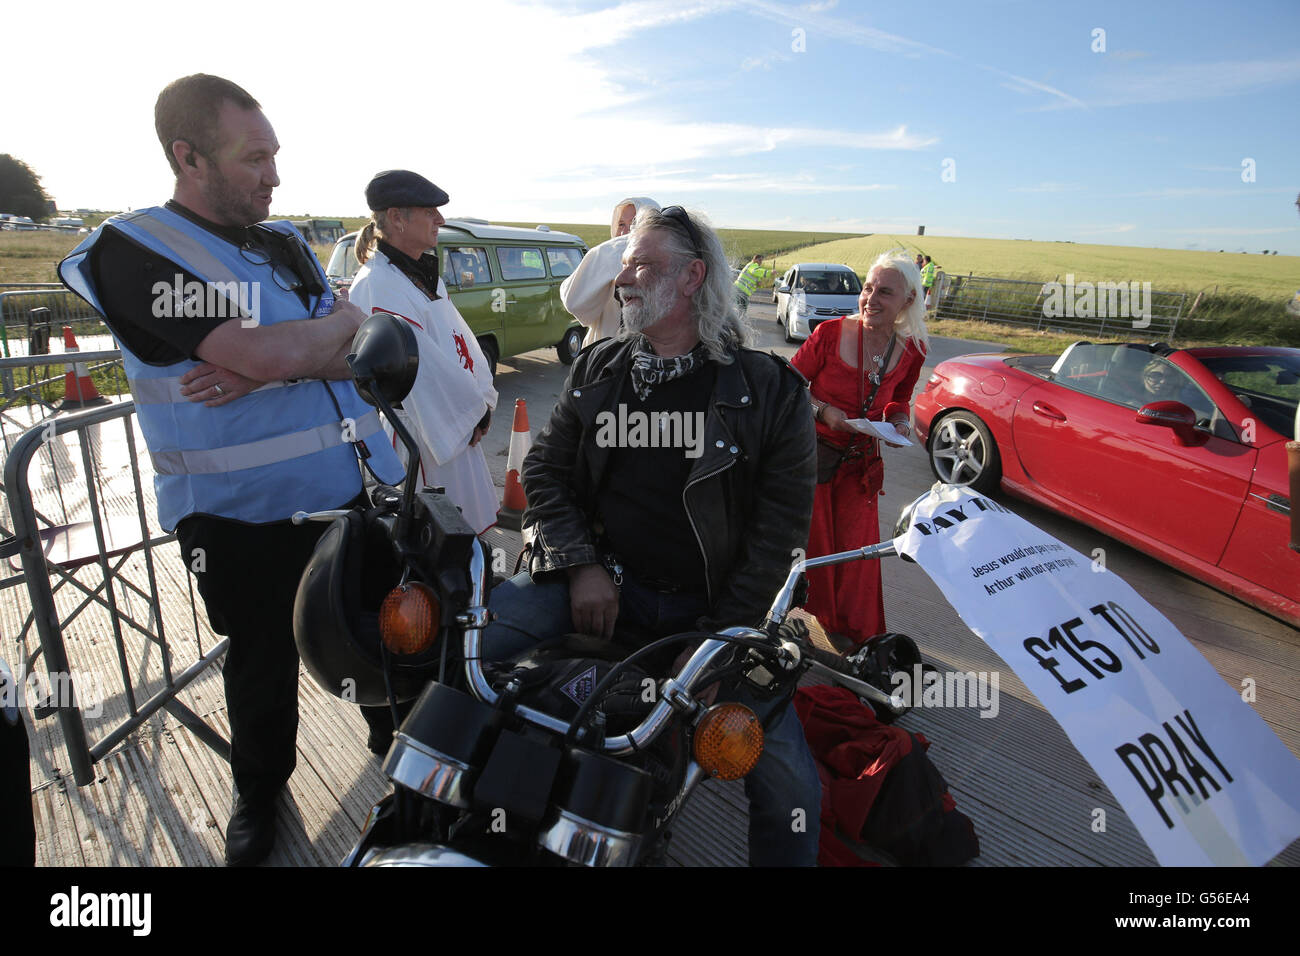 Avebury, UK. 20th June, 2016. Parking Fee Protest at Stonehenge during Summer Solstice celebrations against English Heritage's recent introduction of the parking fee © Guy Corbishley/Alamy Live News Stock Photo